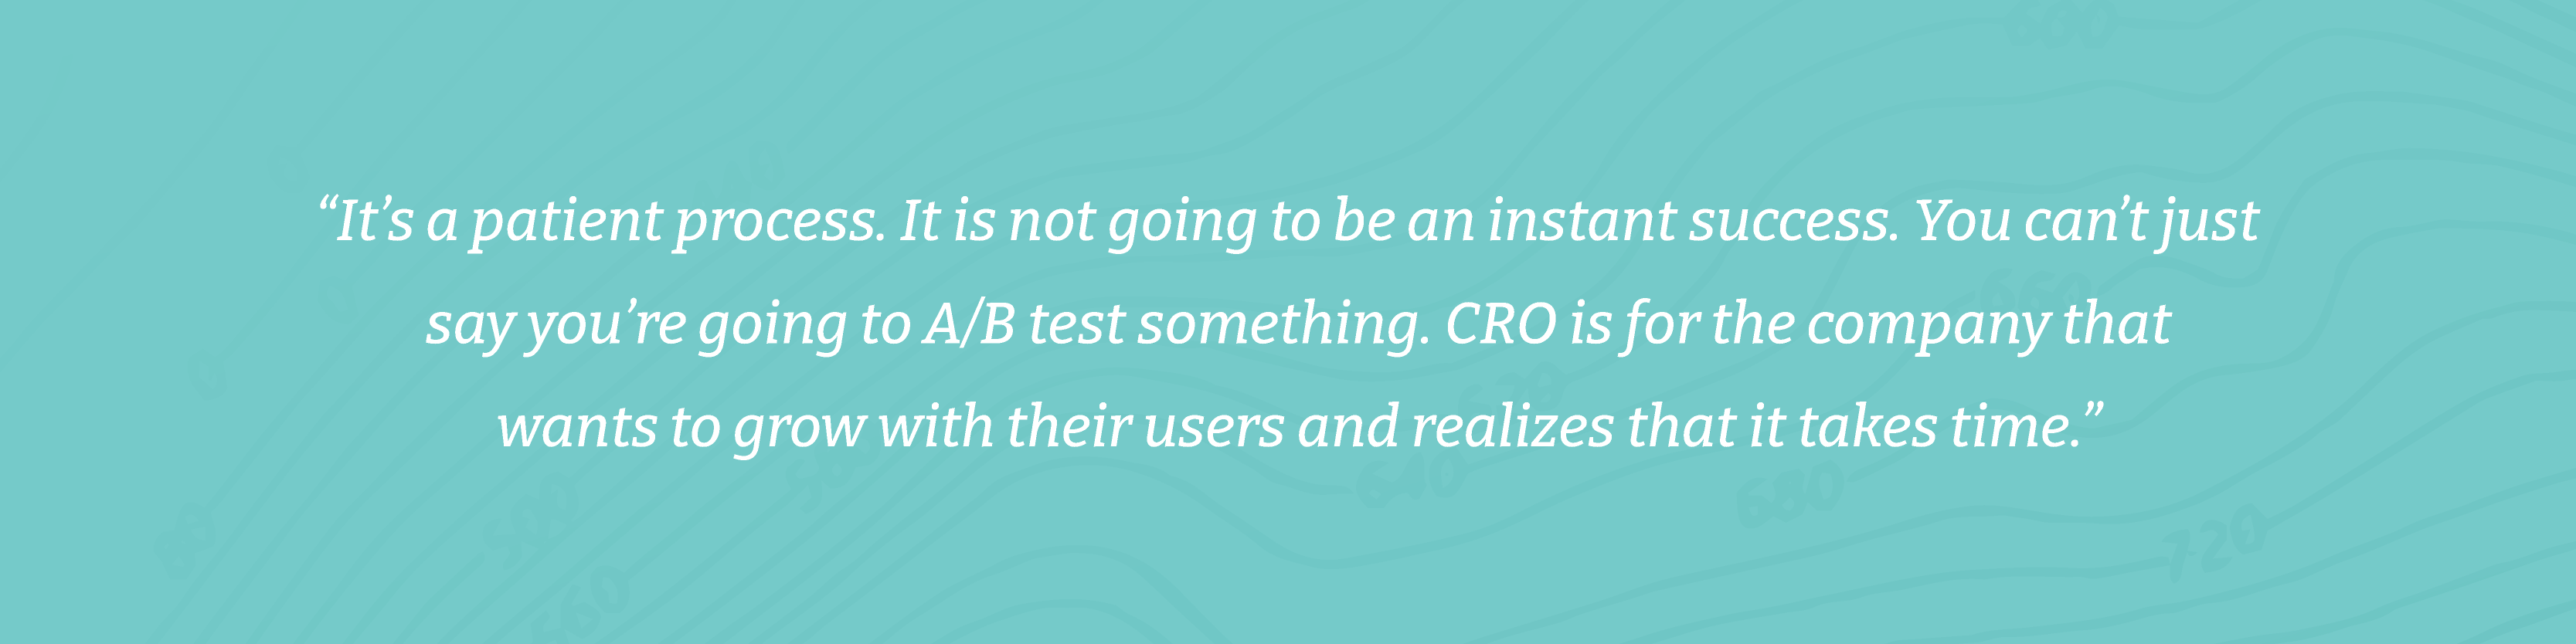 “It’s a patient process. It is not going to be an instant success. You can’t just say you’re going to A/B test something. CRO is for the company that wants to grow with their users and realizes that it takes time.”